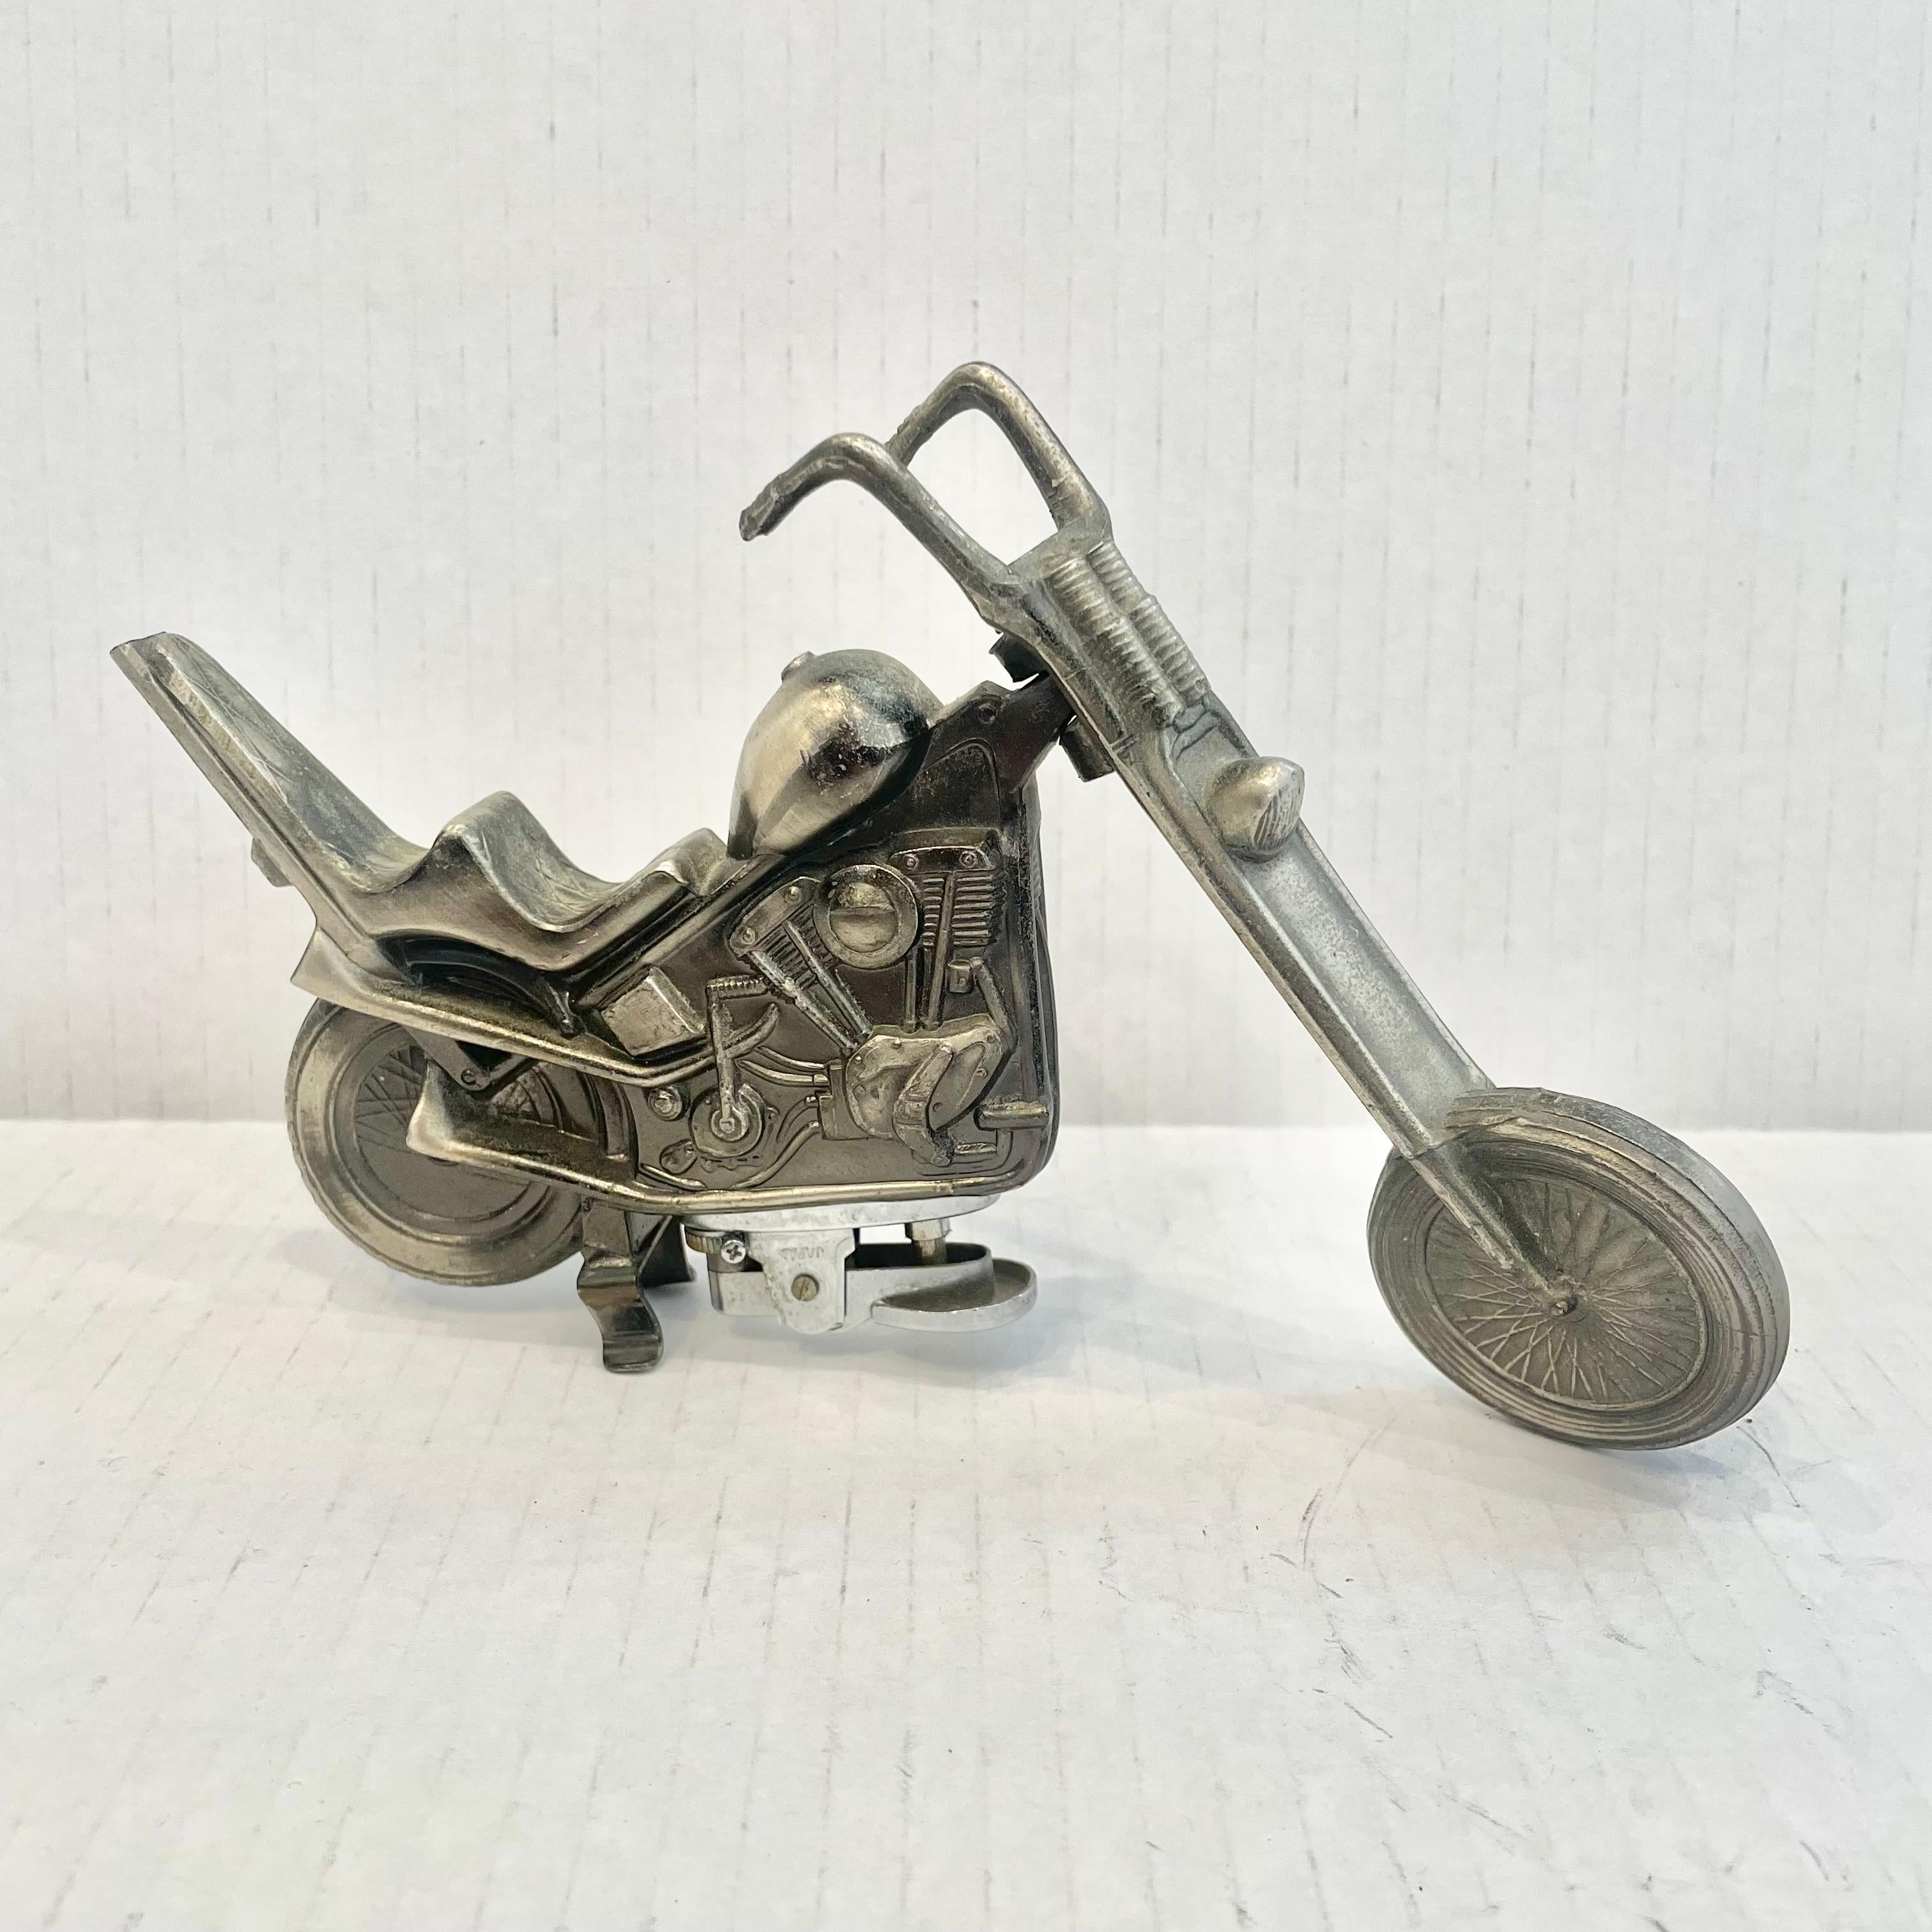 Cool vintage table lighter in the shape of a two seat chopper motorcycle. Made completely of metal with a hollow body. Beautiful burnished silver color with intricate details. Tip of backrest is broken off. Cool tobacco accessory and conversation